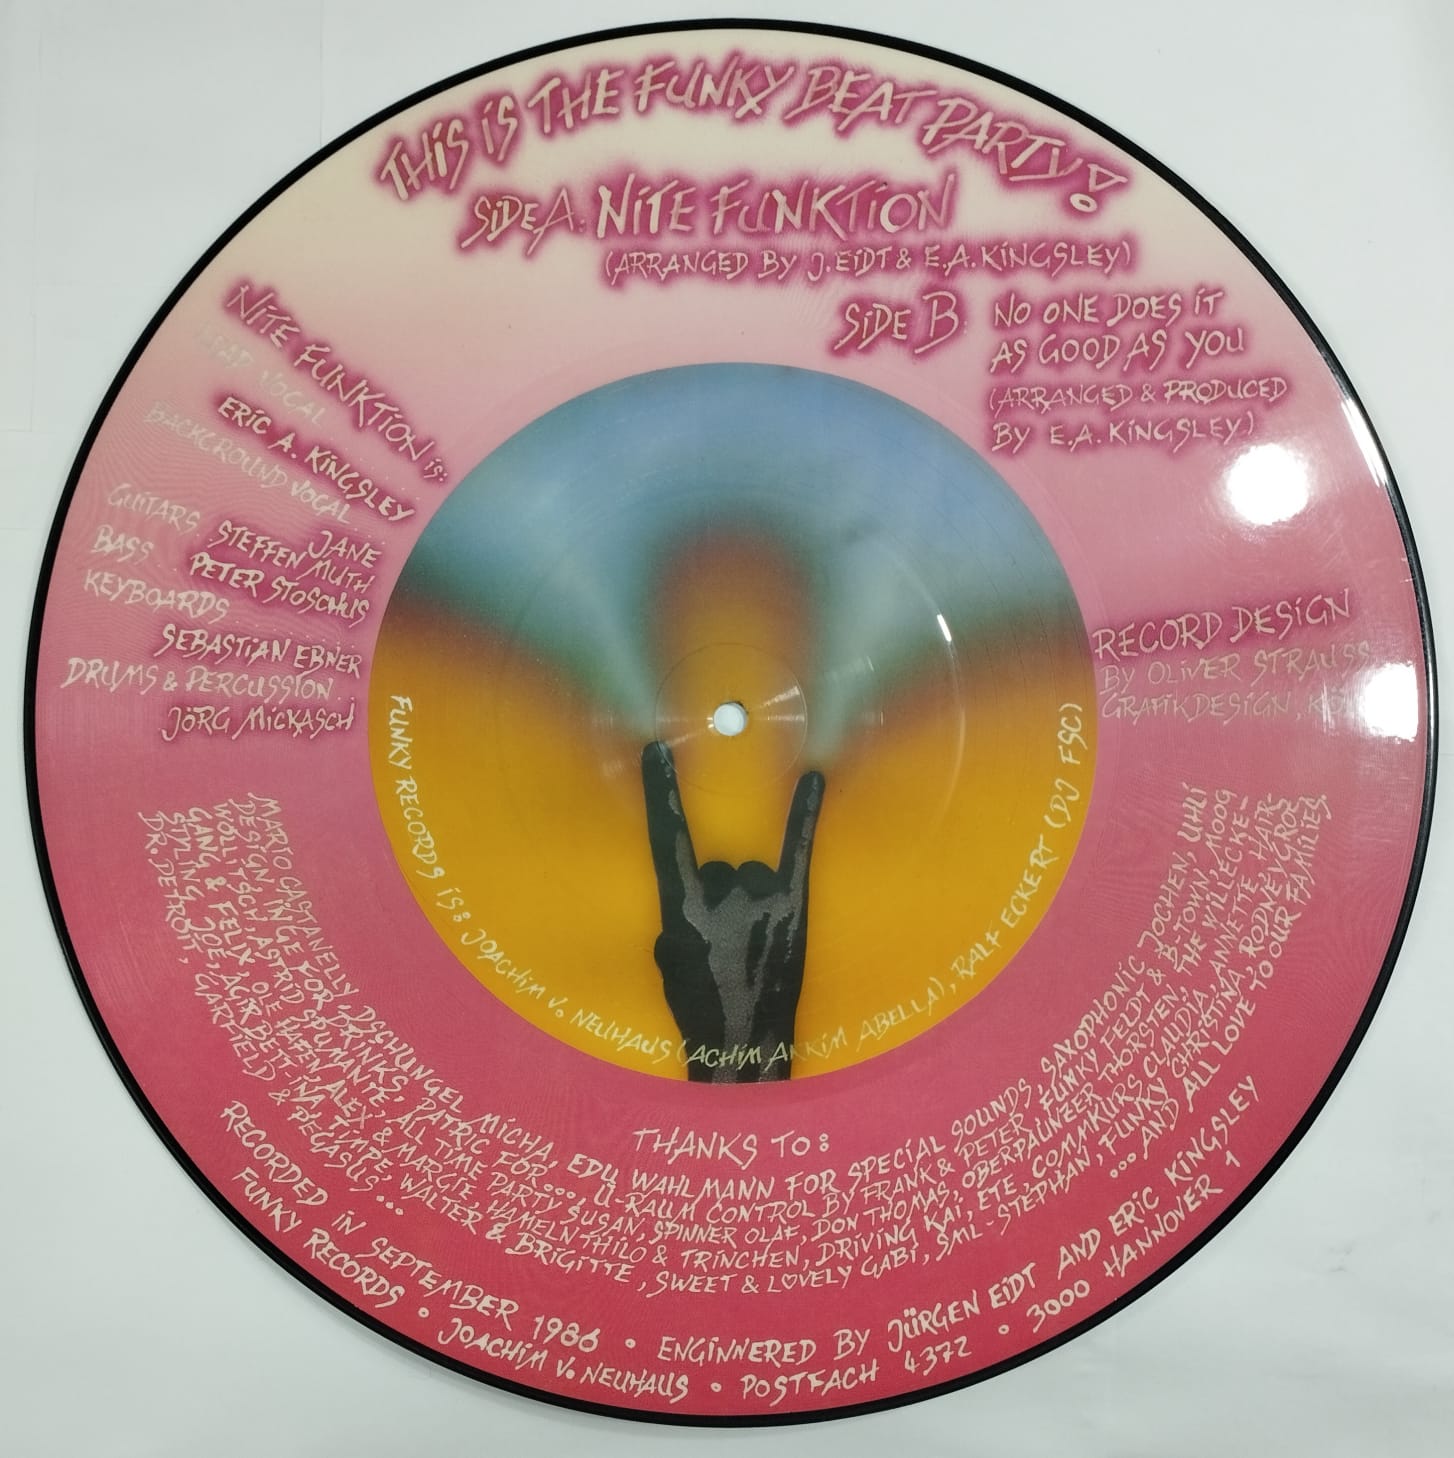 Nite Funktion ‎– Sidestep Snappin' (Single, Picture Disc)